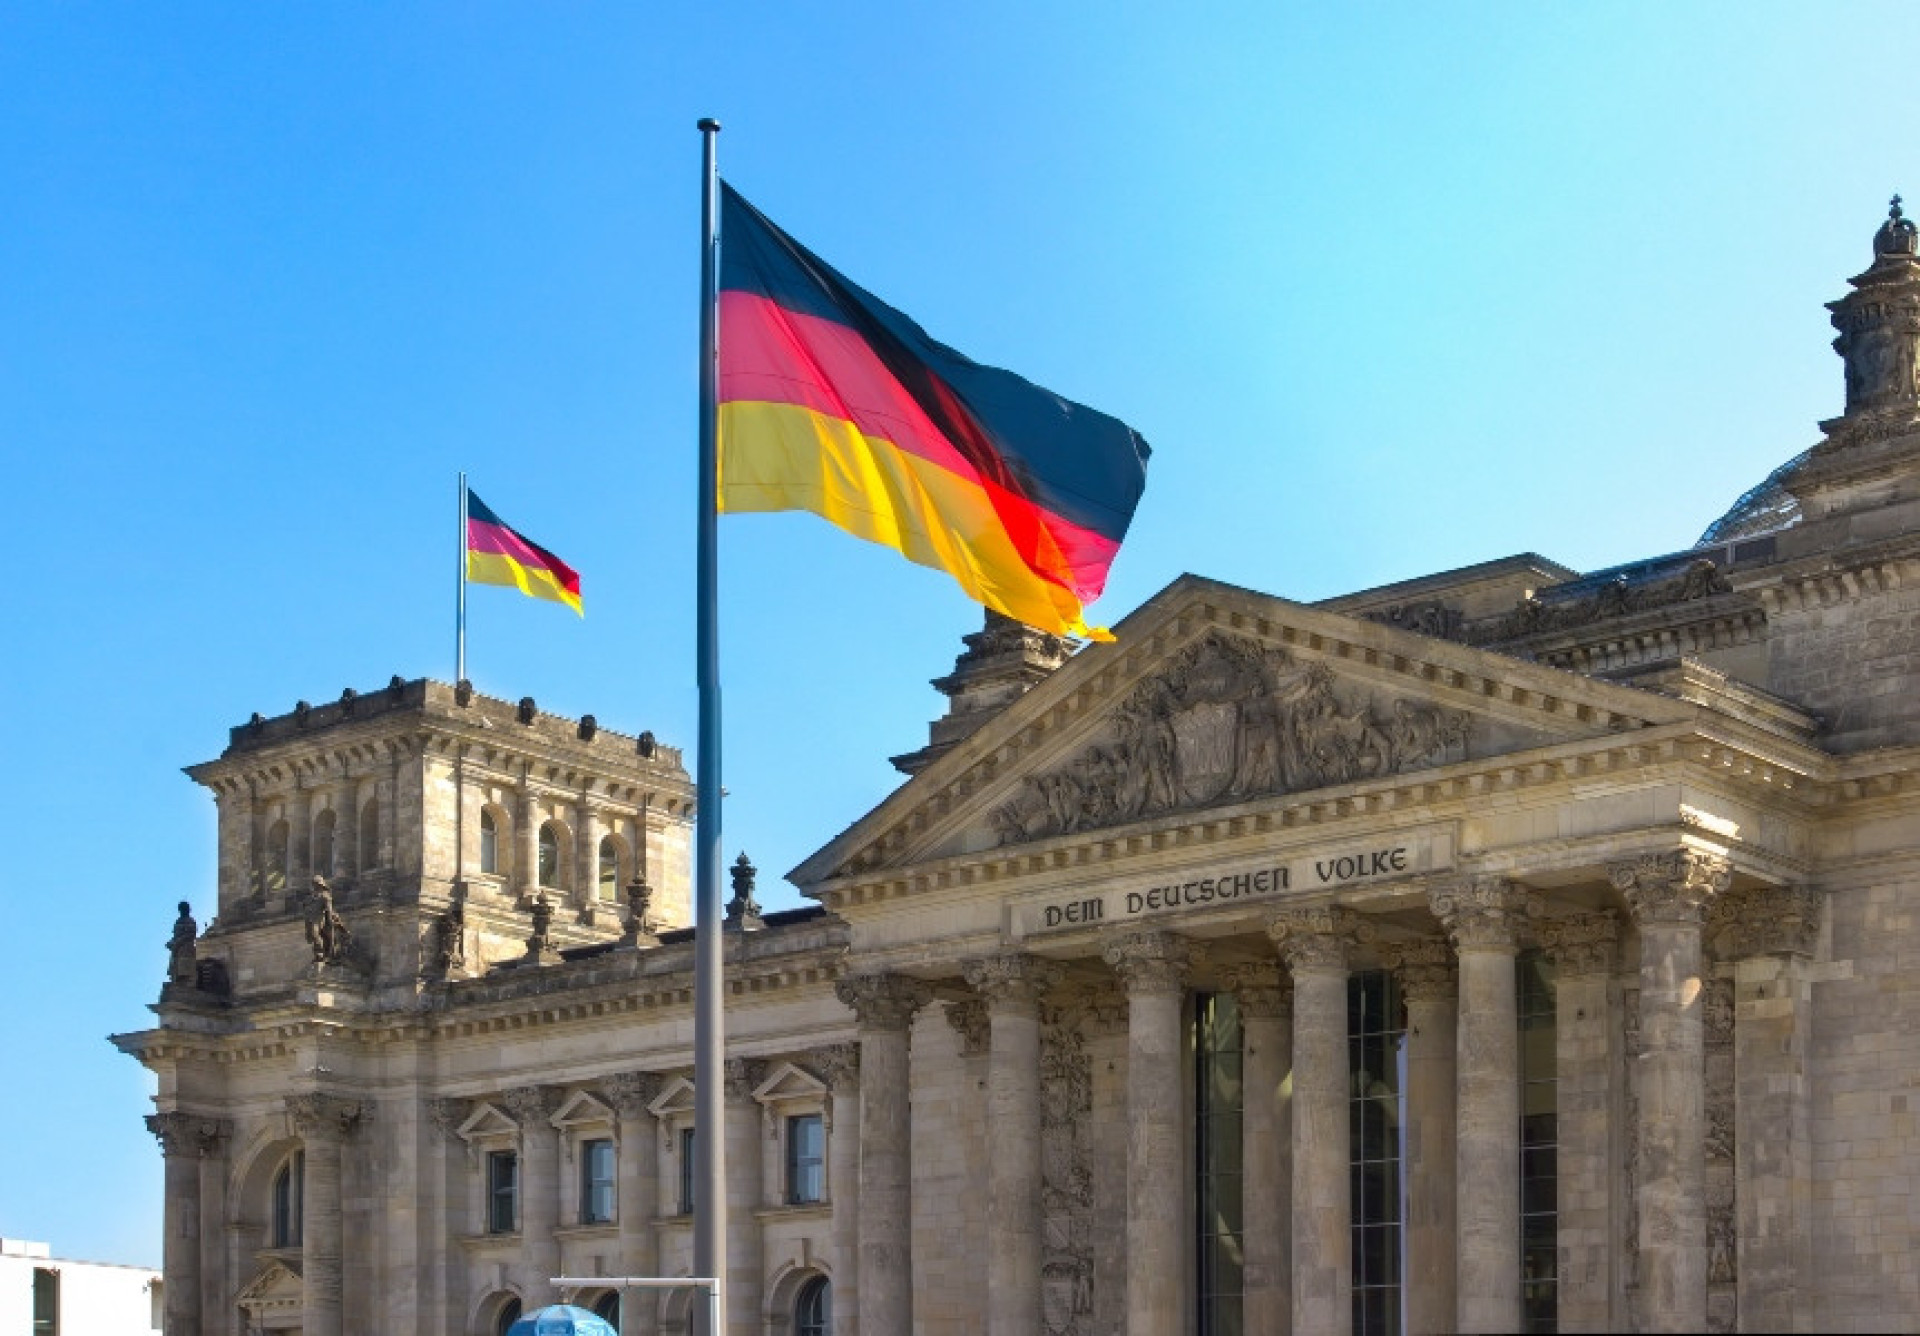 <p>Germany has secured the 29th position in global life expectancy rankings. This can be attributed to the country being the wealthiest in the European Union, with vast resources at its disposal to take care of its citizenry and improve living quality. The country's emphasis on healthcare and wellness has led to longer lifespans for its citizens.</p><p>You may also like:<a href="https://www.starsinsider.com/n/185190?utm_source=msn.com&utm_medium=display&utm_campaign=referral_description&utm_content=582401en-en"> What religious ideologies do the celebs follow?</a></p>